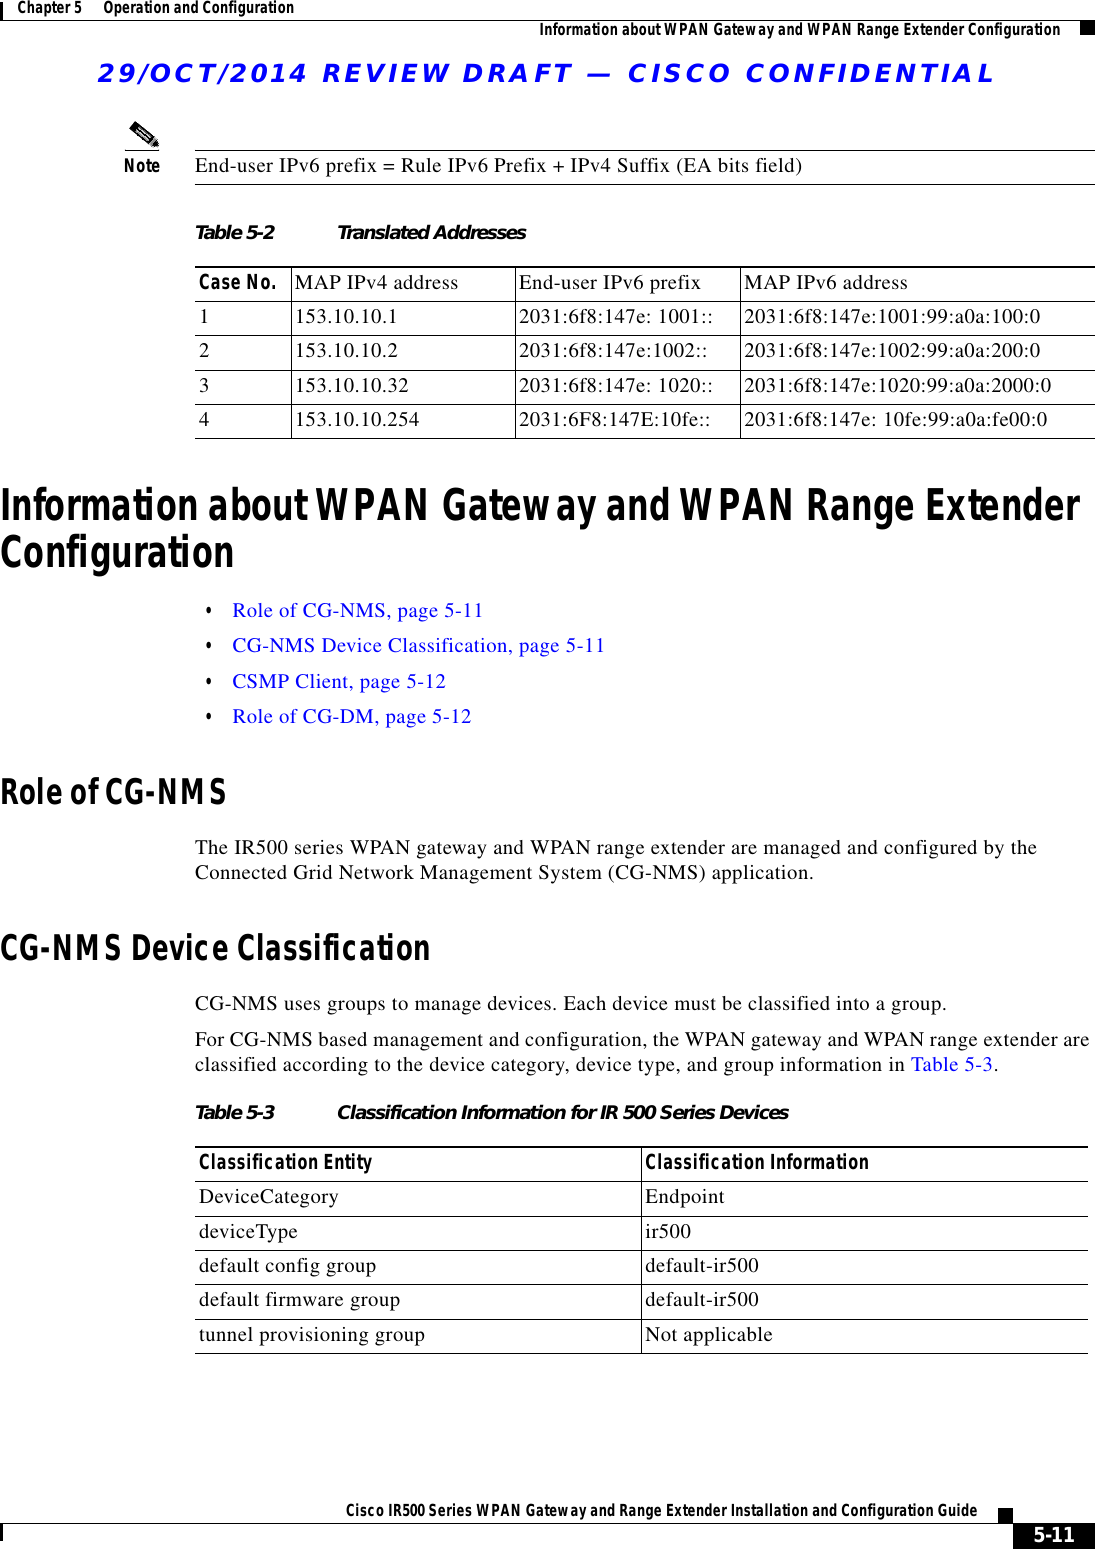 29/OCT/2014 REVIEW DRAFT — CISCO CONFIDENTIAL5-11Cisco IR500 Series WPAN Gateway and Range Extender Installation and Configuration Guide Chapter 5      Operation and Configuration Information about WPAN Gateway and WPAN Range Extender ConfigurationNote End-user IPv6 prefix = Rule IPv6 Prefix + IPv4 Suffix (EA bits field)Table 5-2 Translated AddressesCase No. MAP IPv4 address End-user IPv6 prefix MAP IPv6 address1153.10.10.1 2031:6f8:147e: 1001:: 2031:6f8:147e:1001:99:a0a:100:02153.10.10.2 2031:6f8:147e:1002:: 2031:6f8:147e:1002:99:a0a:200:03153.10.10.32 2031:6f8:147e: 1020:: 2031:6f8:147e:1020:99:a0a:2000:04153.10.10.254 2031:6F8:147E:10fe:: 2031:6f8:147e: 10fe:99:a0a:fe00:0Information about WPAN Gateway and WPAN Range Extender Configuration  • Role of CG-NMS, page 5-11  • CG-NMS Device Classification, page 5-11  • CSMP Client, page 5-12  • Role of CG-DM, page 5-12Role of CG-NMSThe IR500 series WPAN gateway and WPAN range extender are managed and configured by the Connected Grid Network Management System (CG-NMS) application.CG-NMS Device ClassificationCG-NMS uses groups to manage devices. Each device must be classified into a group.For CG-NMS based management and configuration, the WPAN gateway and WPAN range extender are classified according to the device category, device type, and group information in Table 5-3.Table 5-3 Classification Information for IR 500 Series DevicesClassification Entity Classification InformationDeviceCategory EndpointdeviceType ir500default config group default-ir500default firmware group default-ir500tunnel provisioning group Not applicable